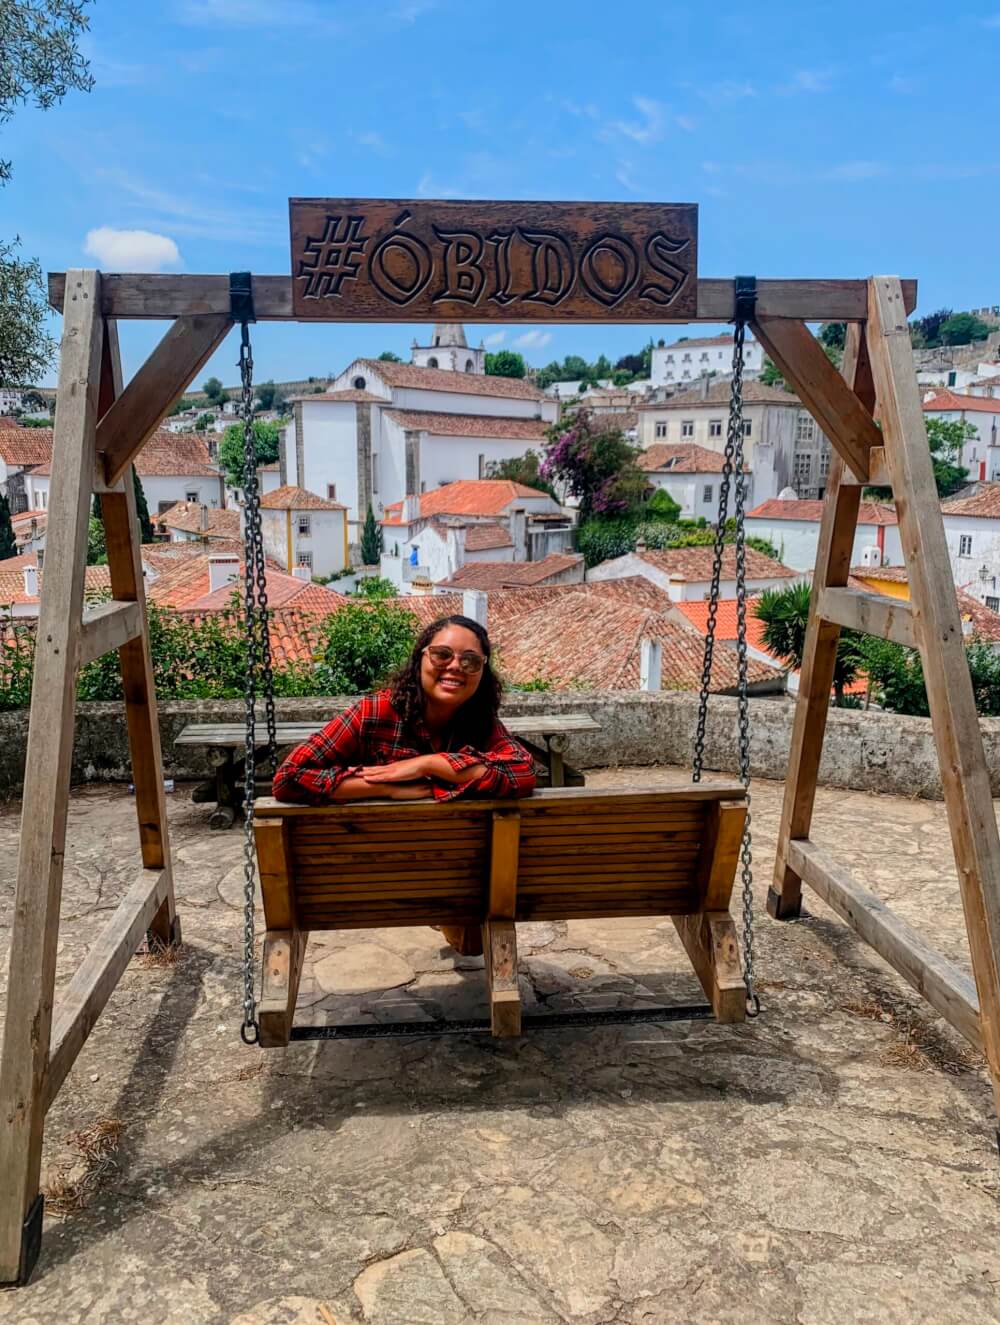 A person sitting on a swing under a sign that says "#Obidos"